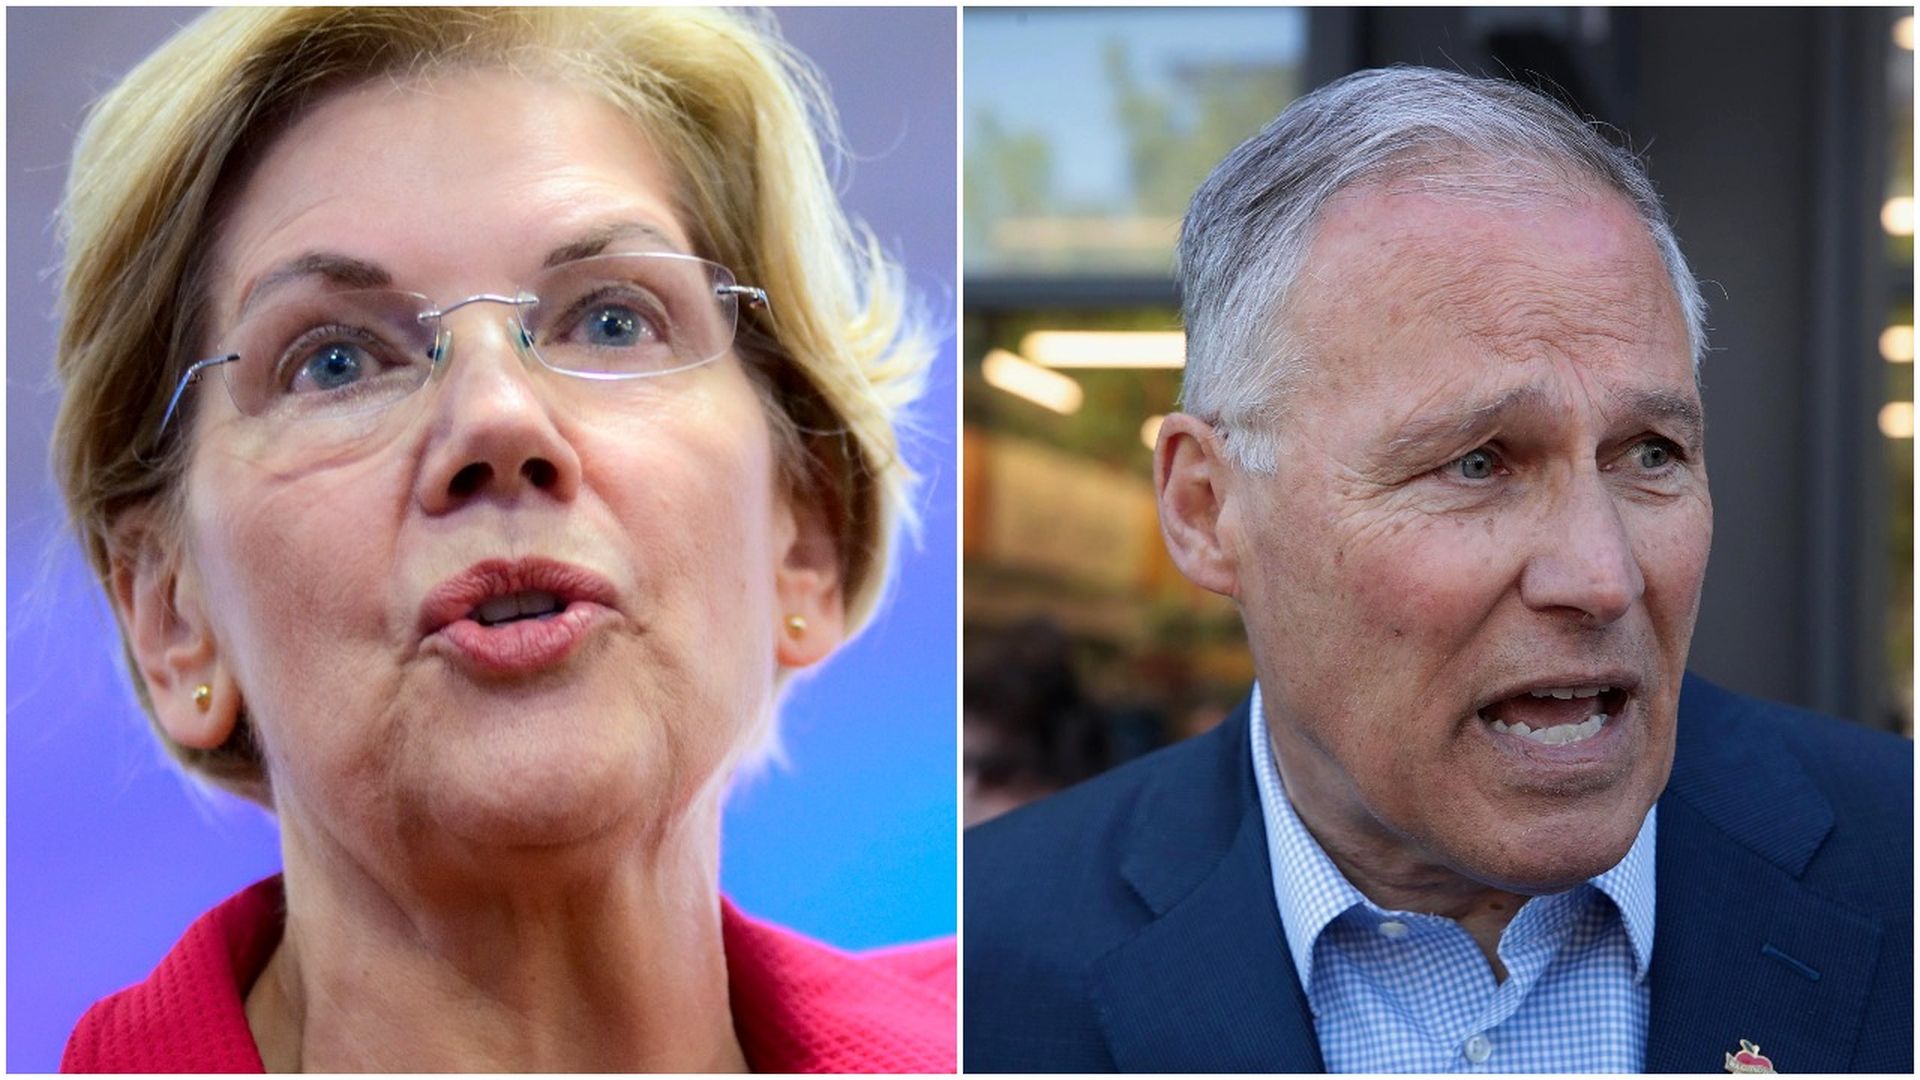 This image is a two way split screen of Elizabeth Warren and Jay Inslee.